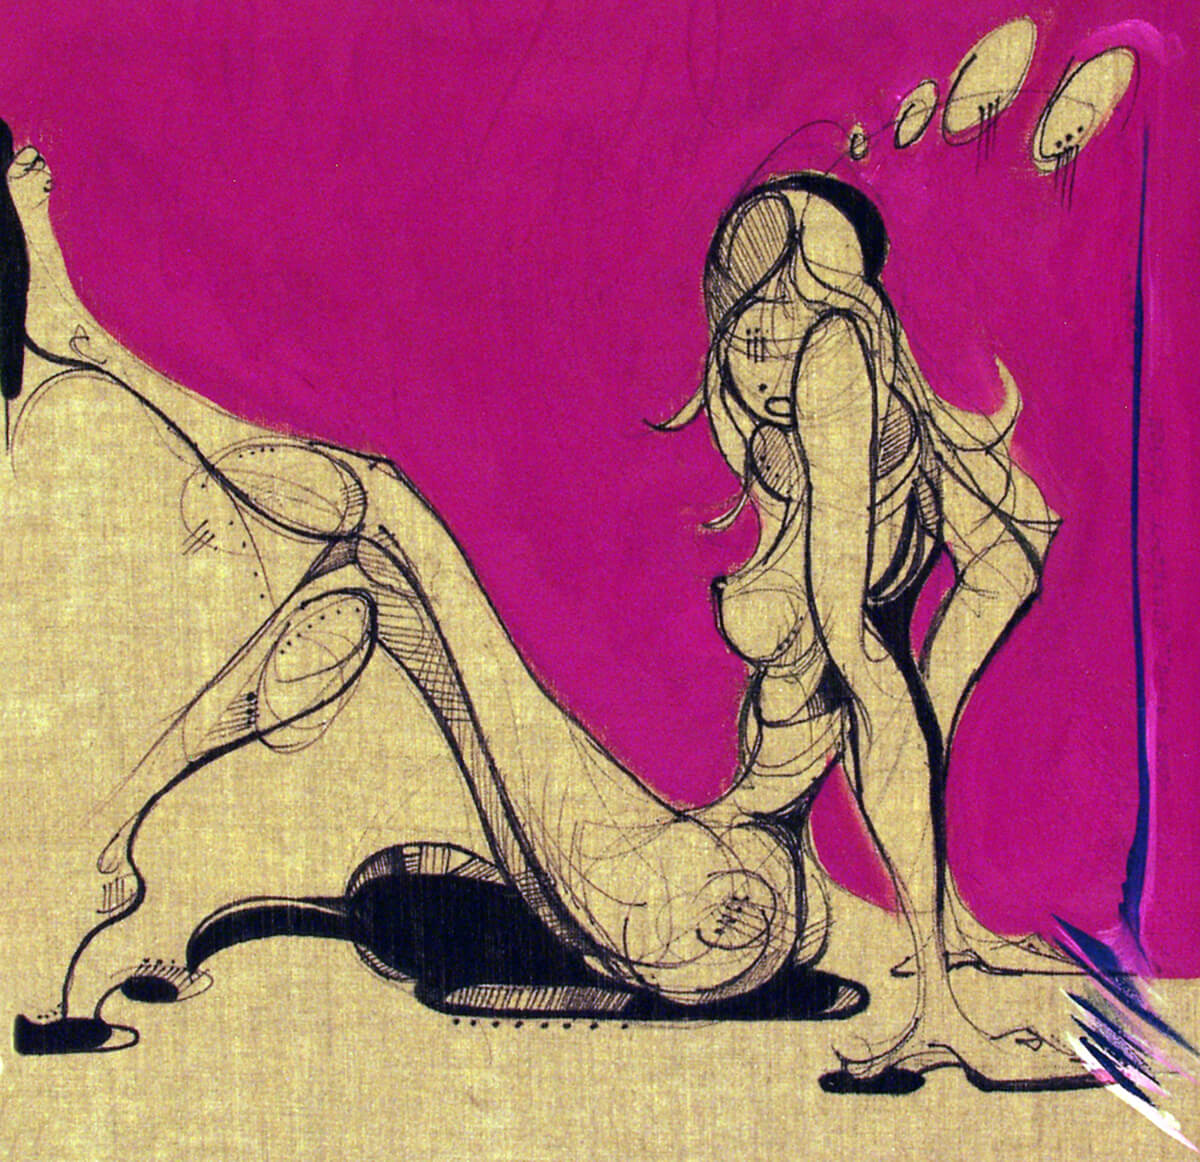 Photo of Woman in Magenta by Michael J. Korber in oil and ink on linen